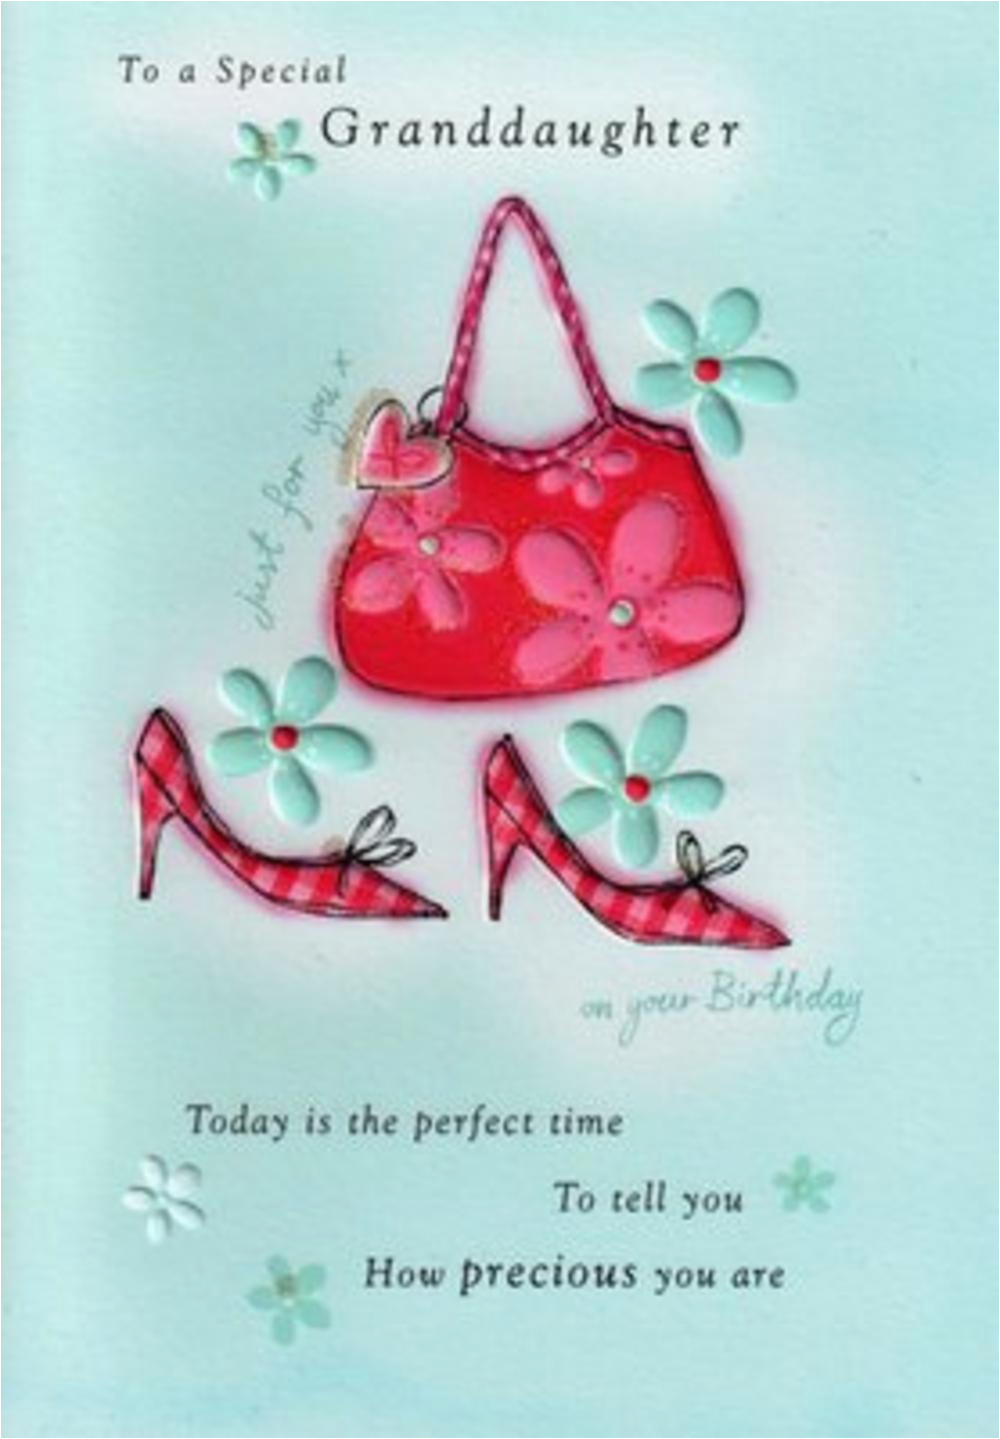 granddaughter birthday poetry in motion card cards